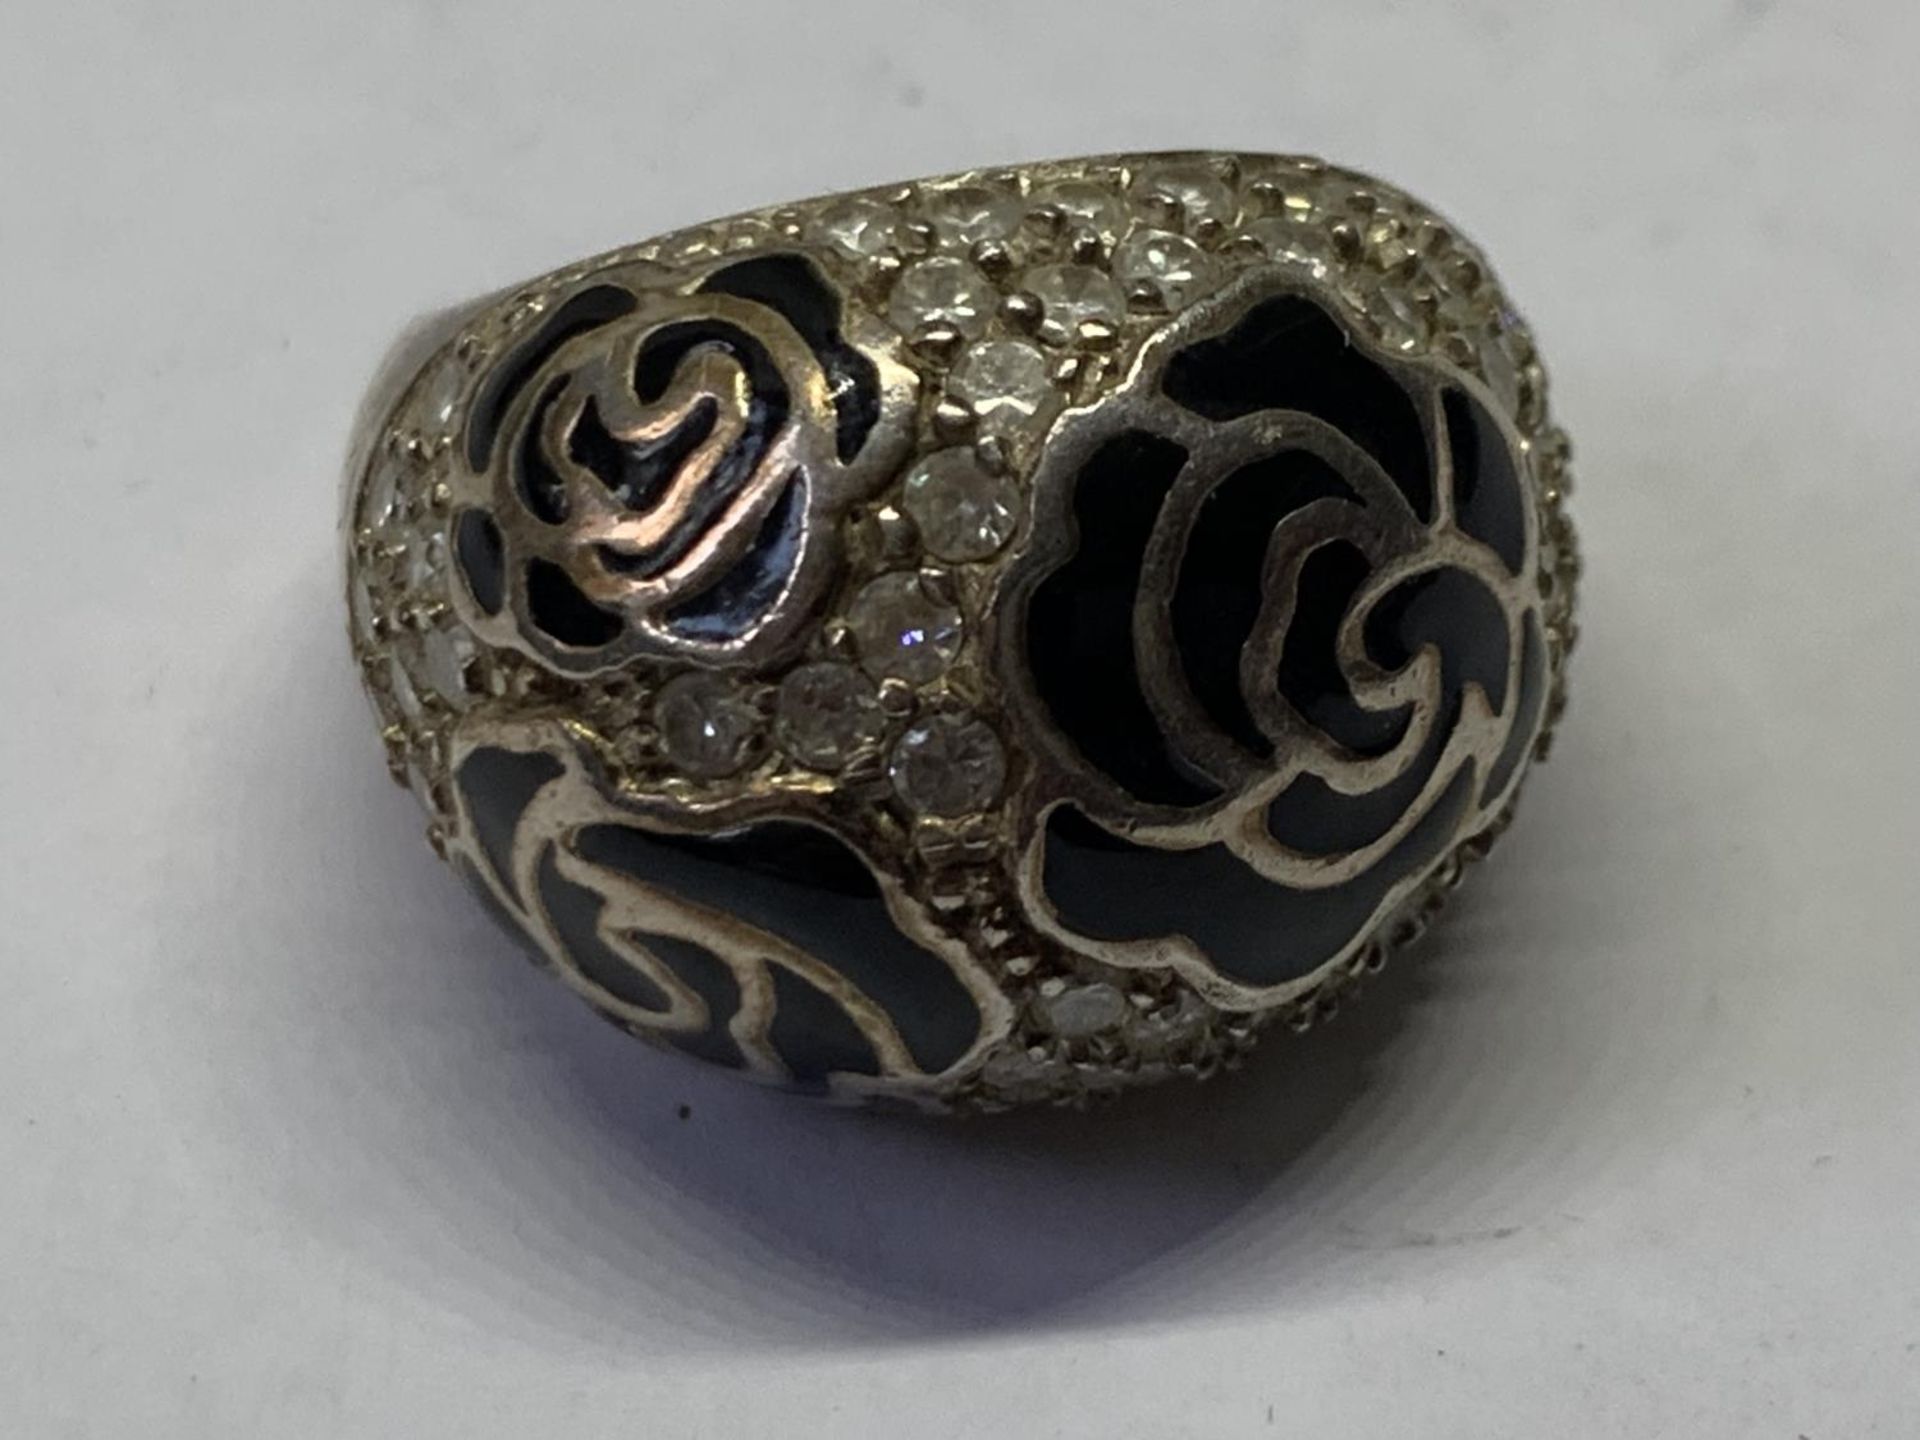 A SILVER AND BLACK RING IN A PRESENTATION BOX - Image 2 of 3